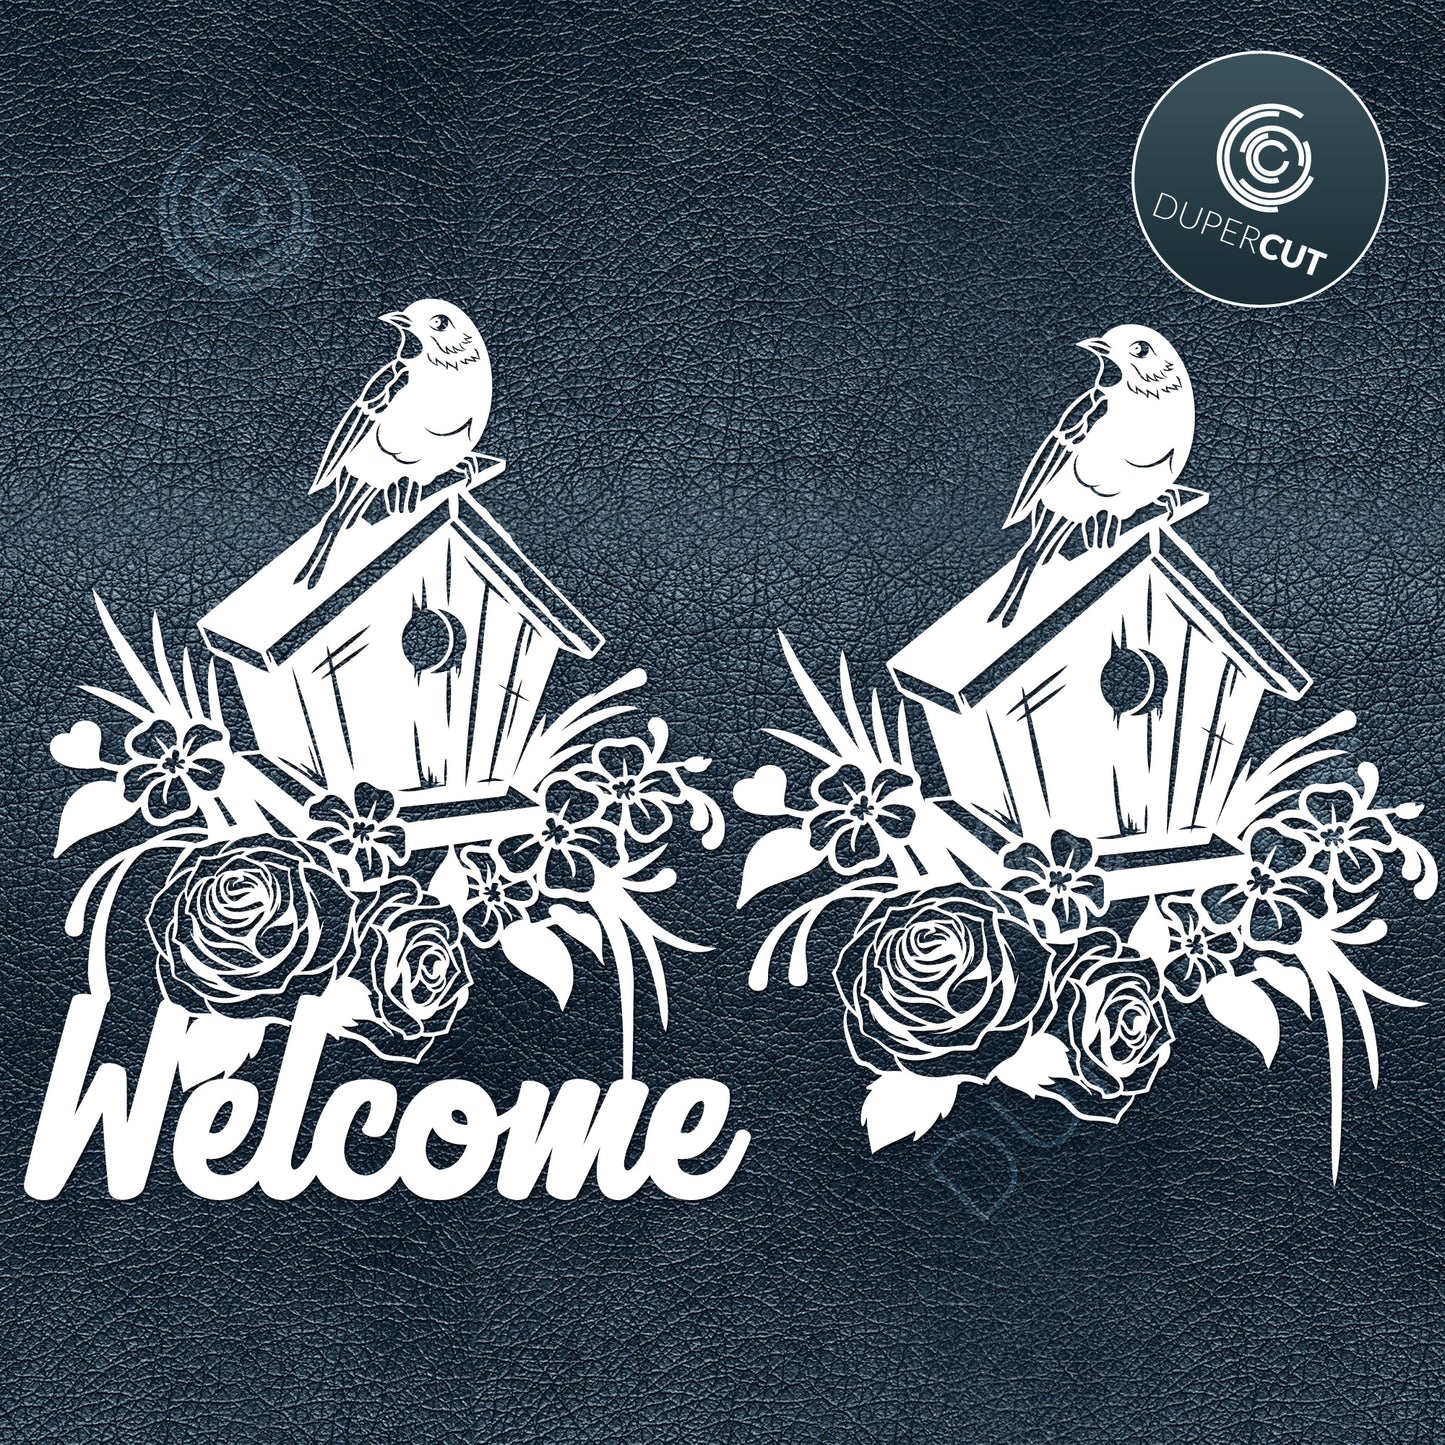 Welcome Sign, birdhouse with roses. Paper cutting template SVG PNG DXF files. For DIY projects Cricut, Glowforge, Silhouette Cameo, CNC Machines.